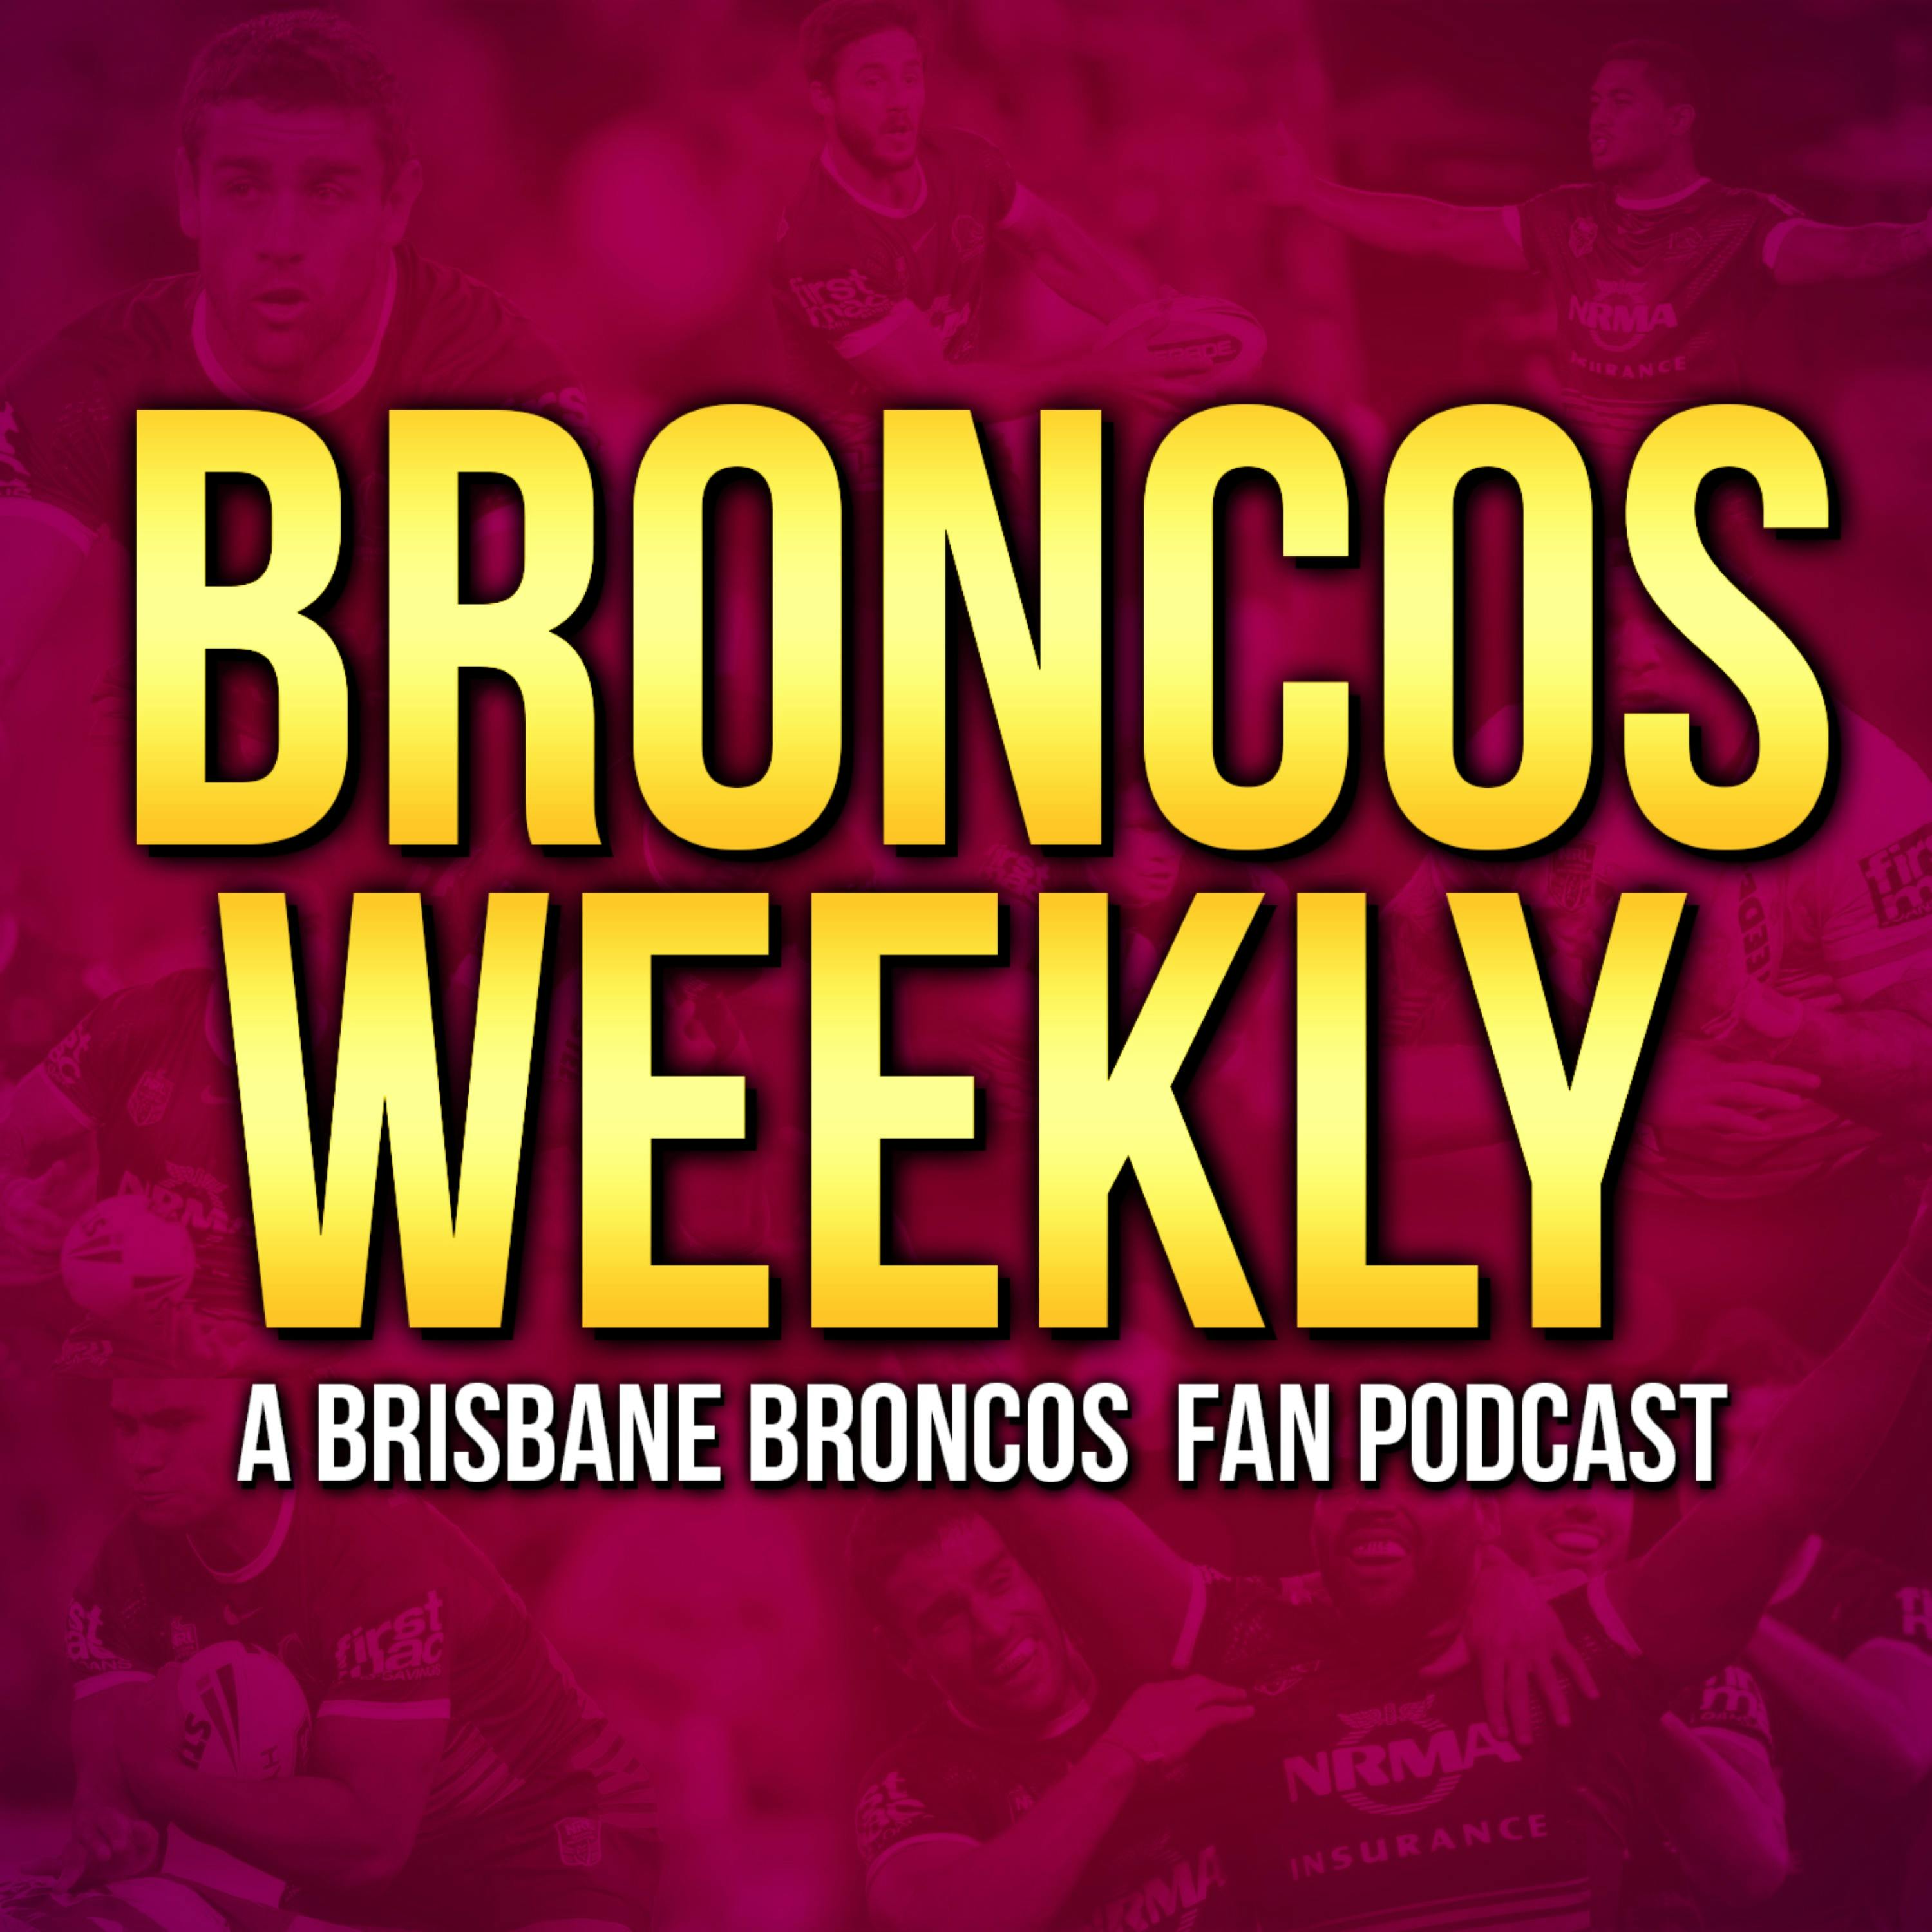 2022 NRL Season Previews - Broncos Weekly Crossover ft. Simo Alley